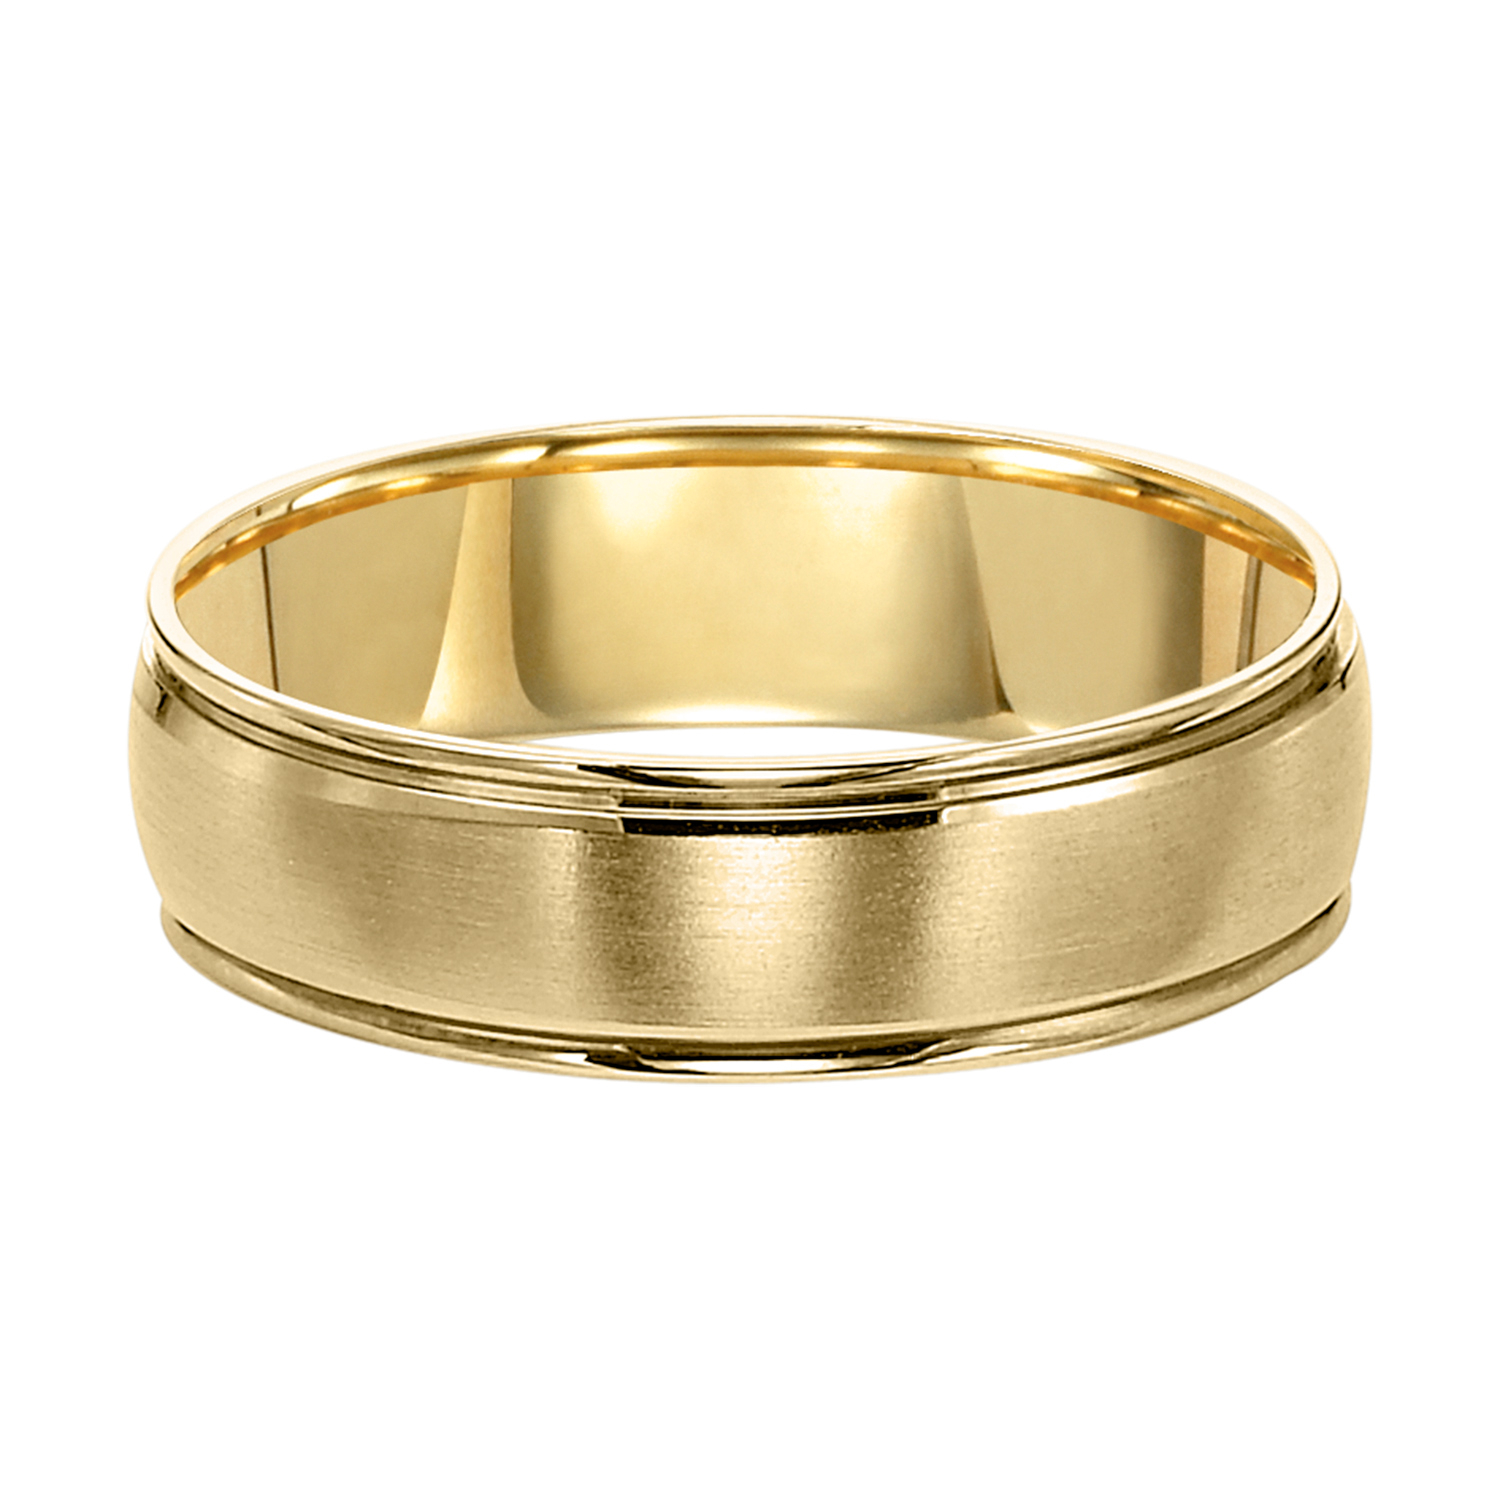 Gents 14K Yellow Gold Wedding Band with Brushed Finish | Lee 